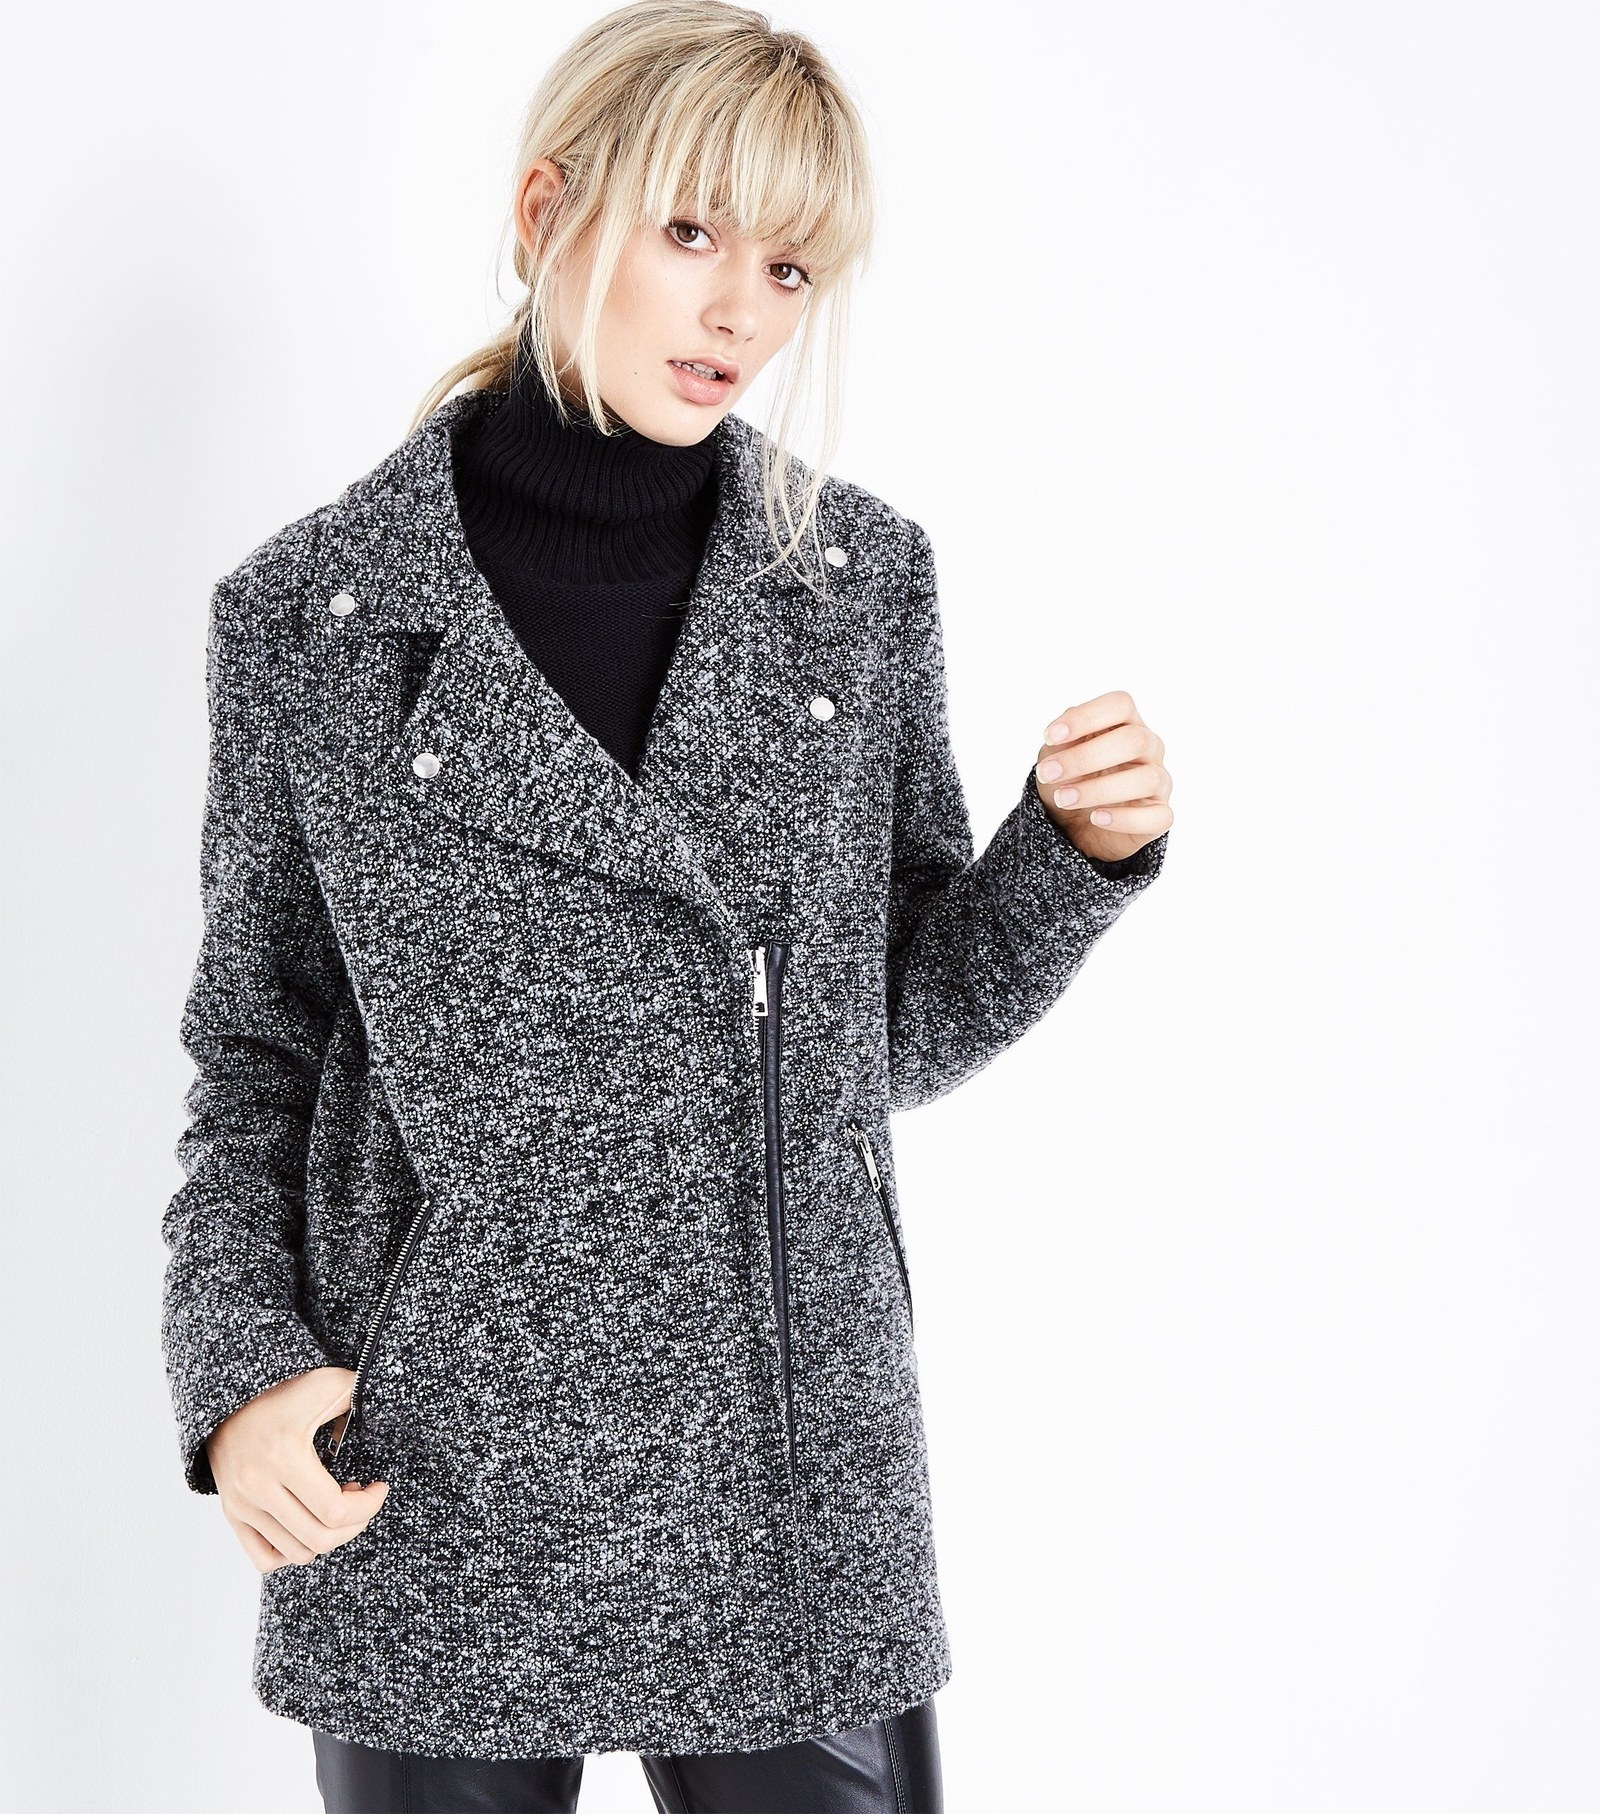 29 Of The Best Places To Buy Inexpensive Coats Online